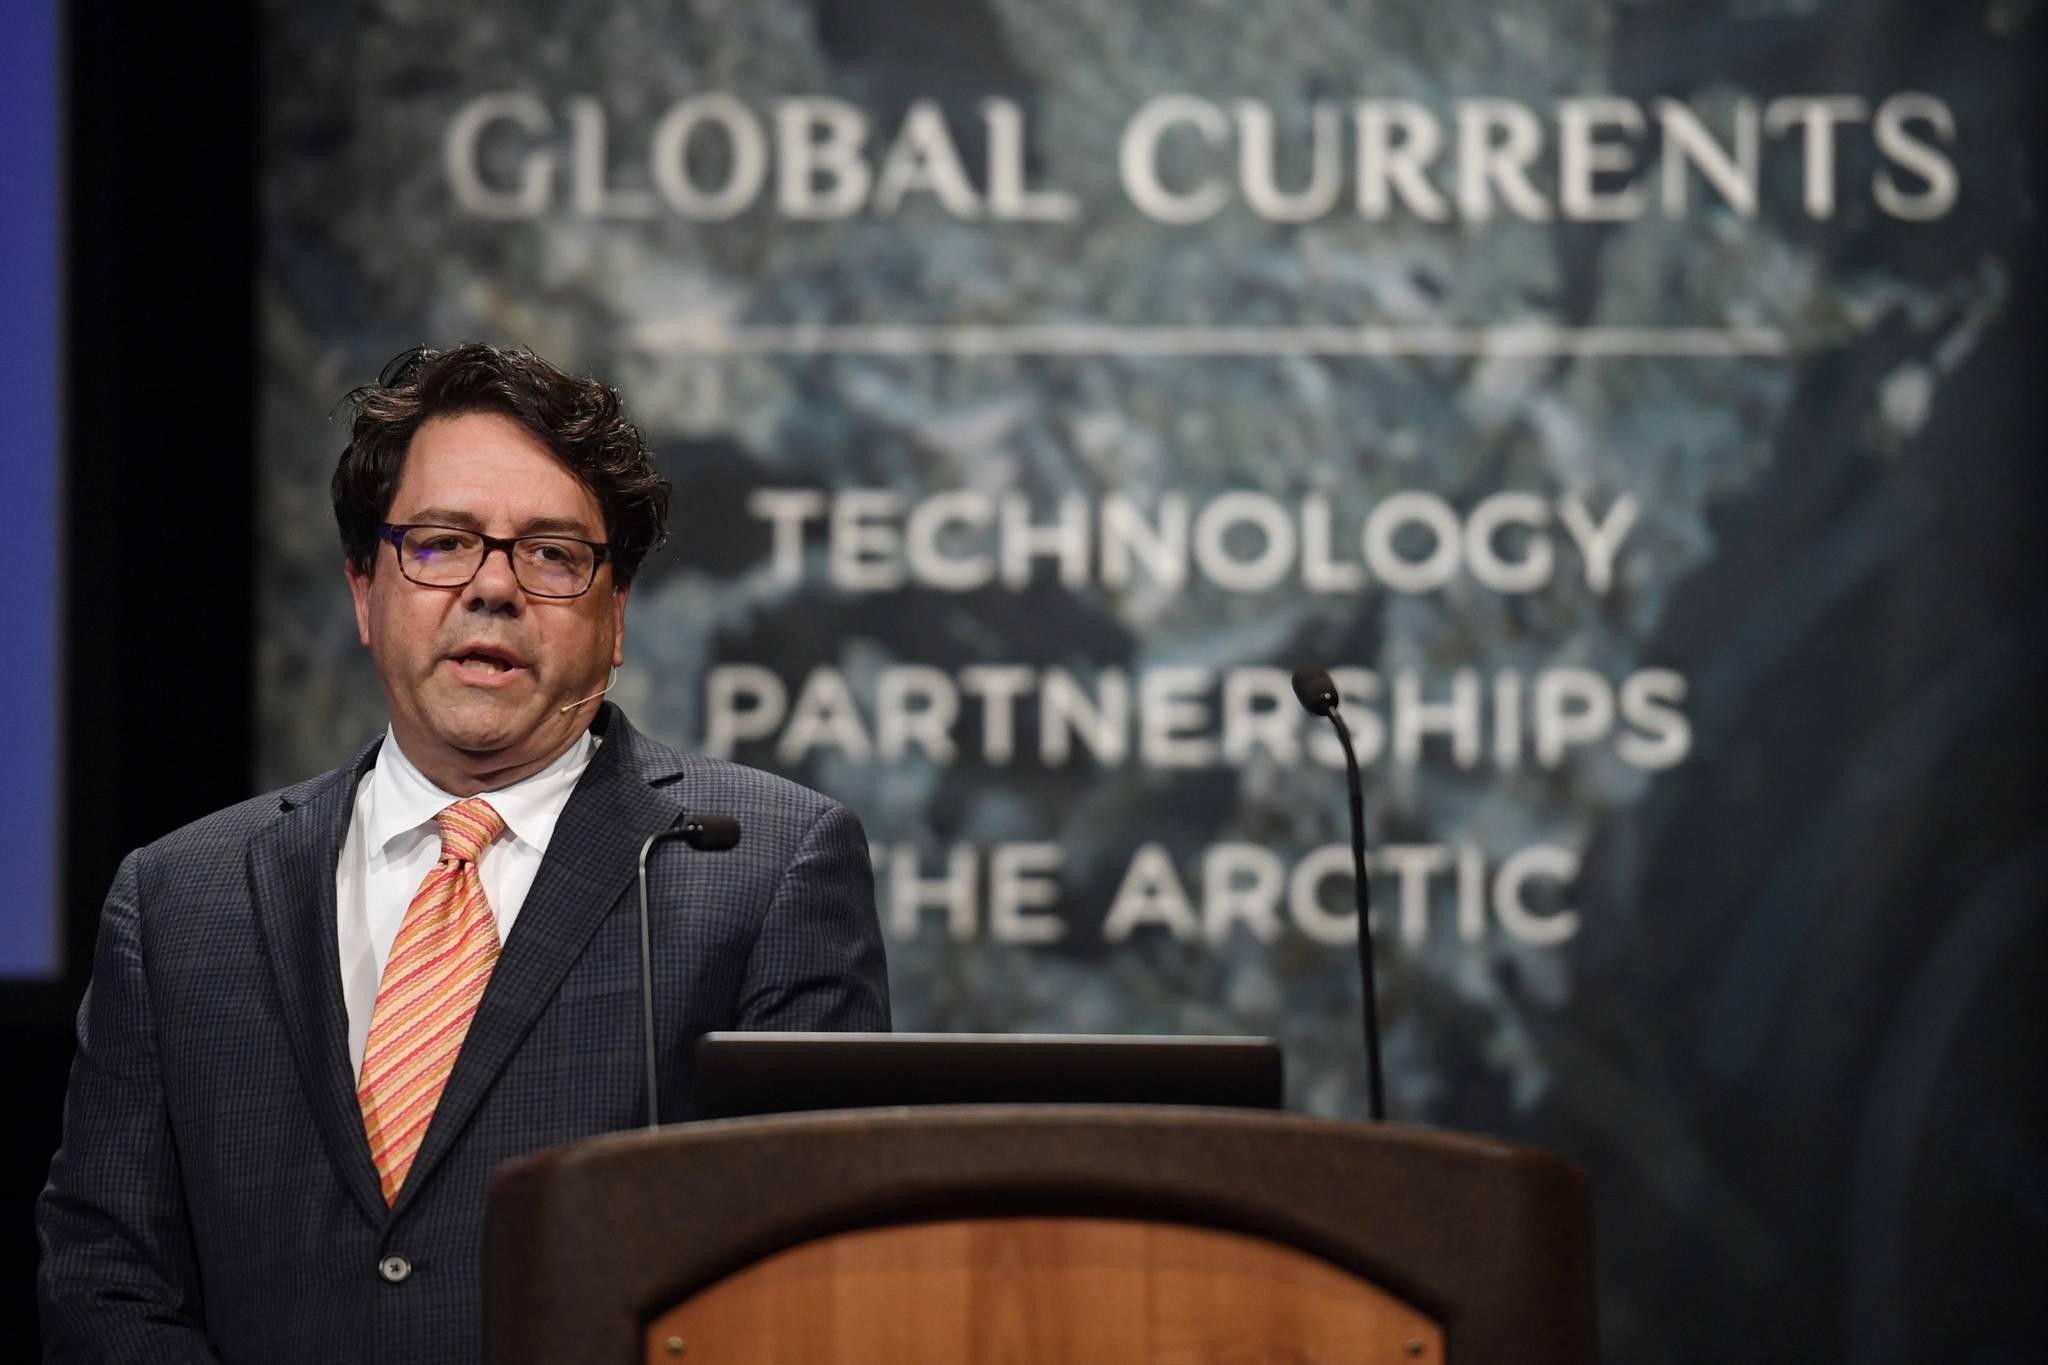 Vincent Pieribone, Vice President of OceanX, deliveries the keynote speech at the annual meeting of the International Forum of Sovereign Wealth Funds at Centennial Hall on Thursday, Sept. 12, 2019. (Michael Penn | Juneau Empire)